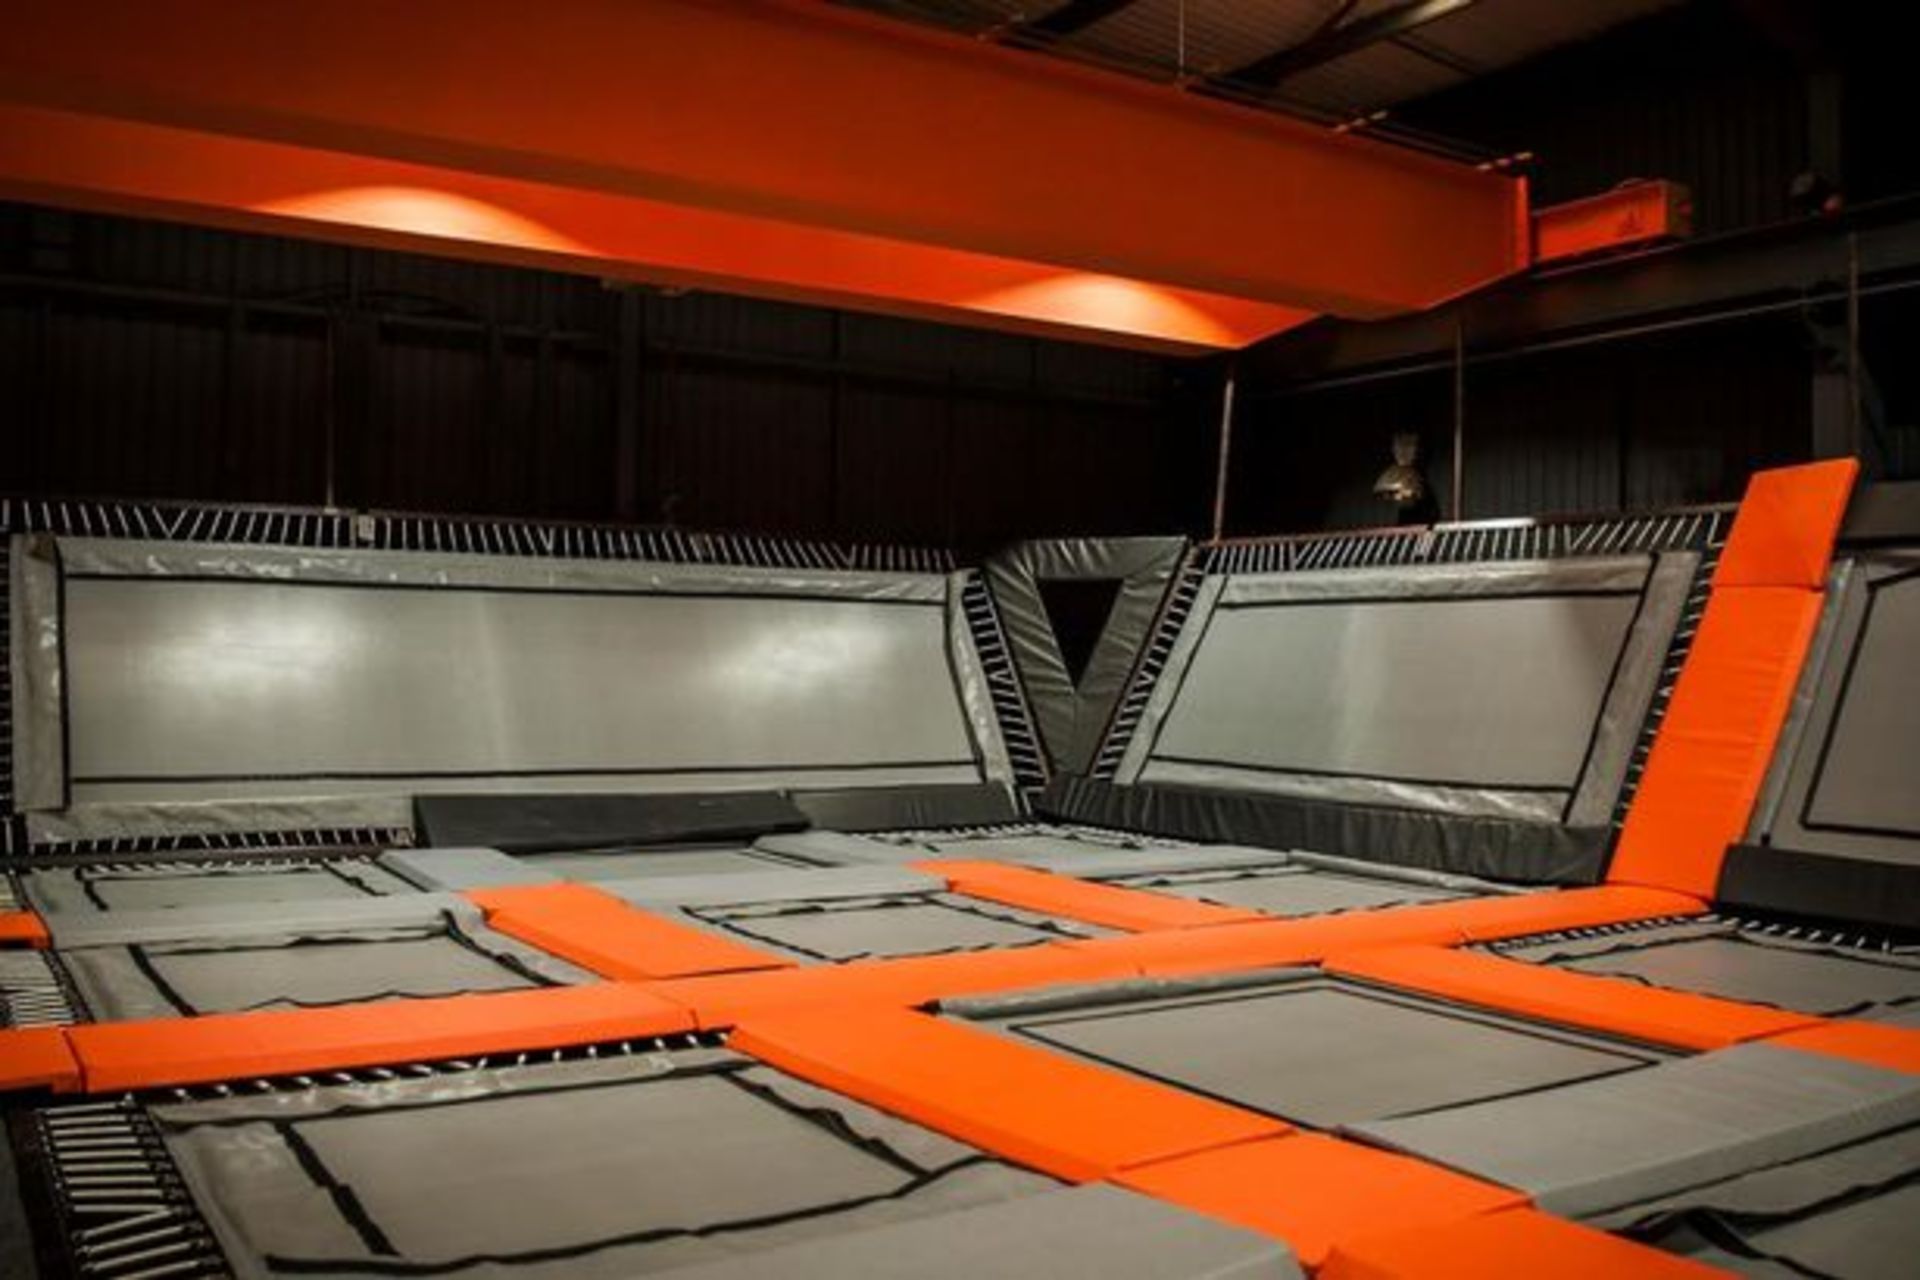 1 x Large Trampoline Park - Disassembled - Includes Dodgeball Arena And Jump Tower - CL766  - - Image 71 of 99